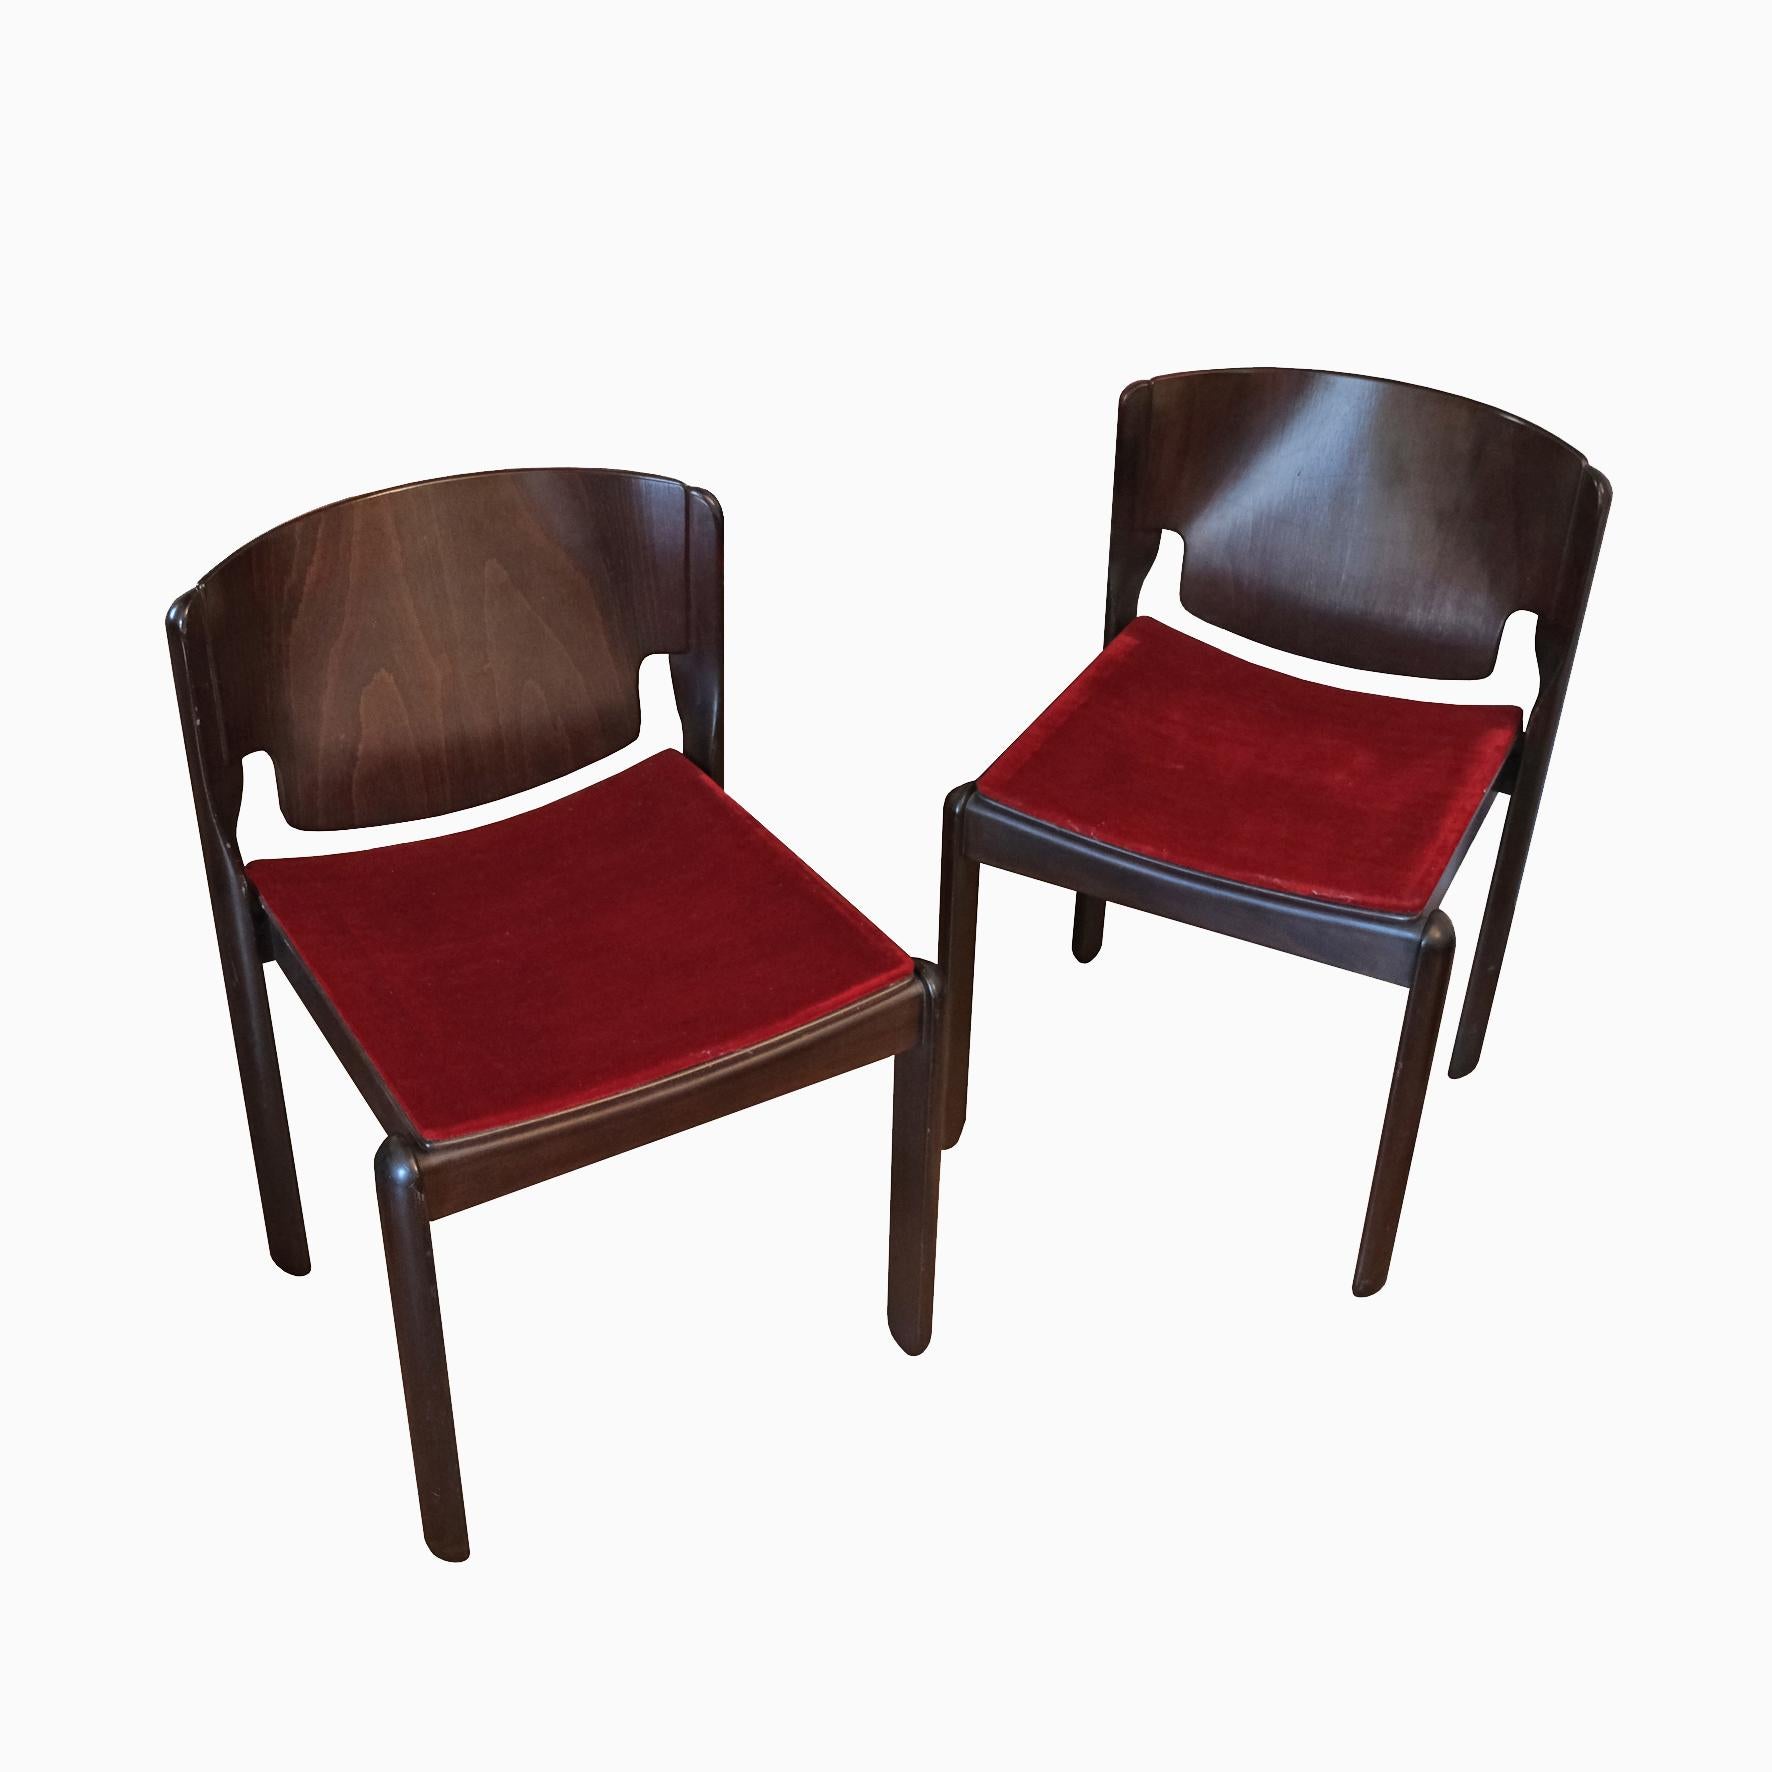 A pair of dark brown walnut stackable dining chairs. Each with a bent plywood back, the seat upholstered with burgundy velvet on four feet.
Manufactured by Cassina.
Italy.
1967.
Provenance
Private collection
Literature
Domus 444, November 1966,